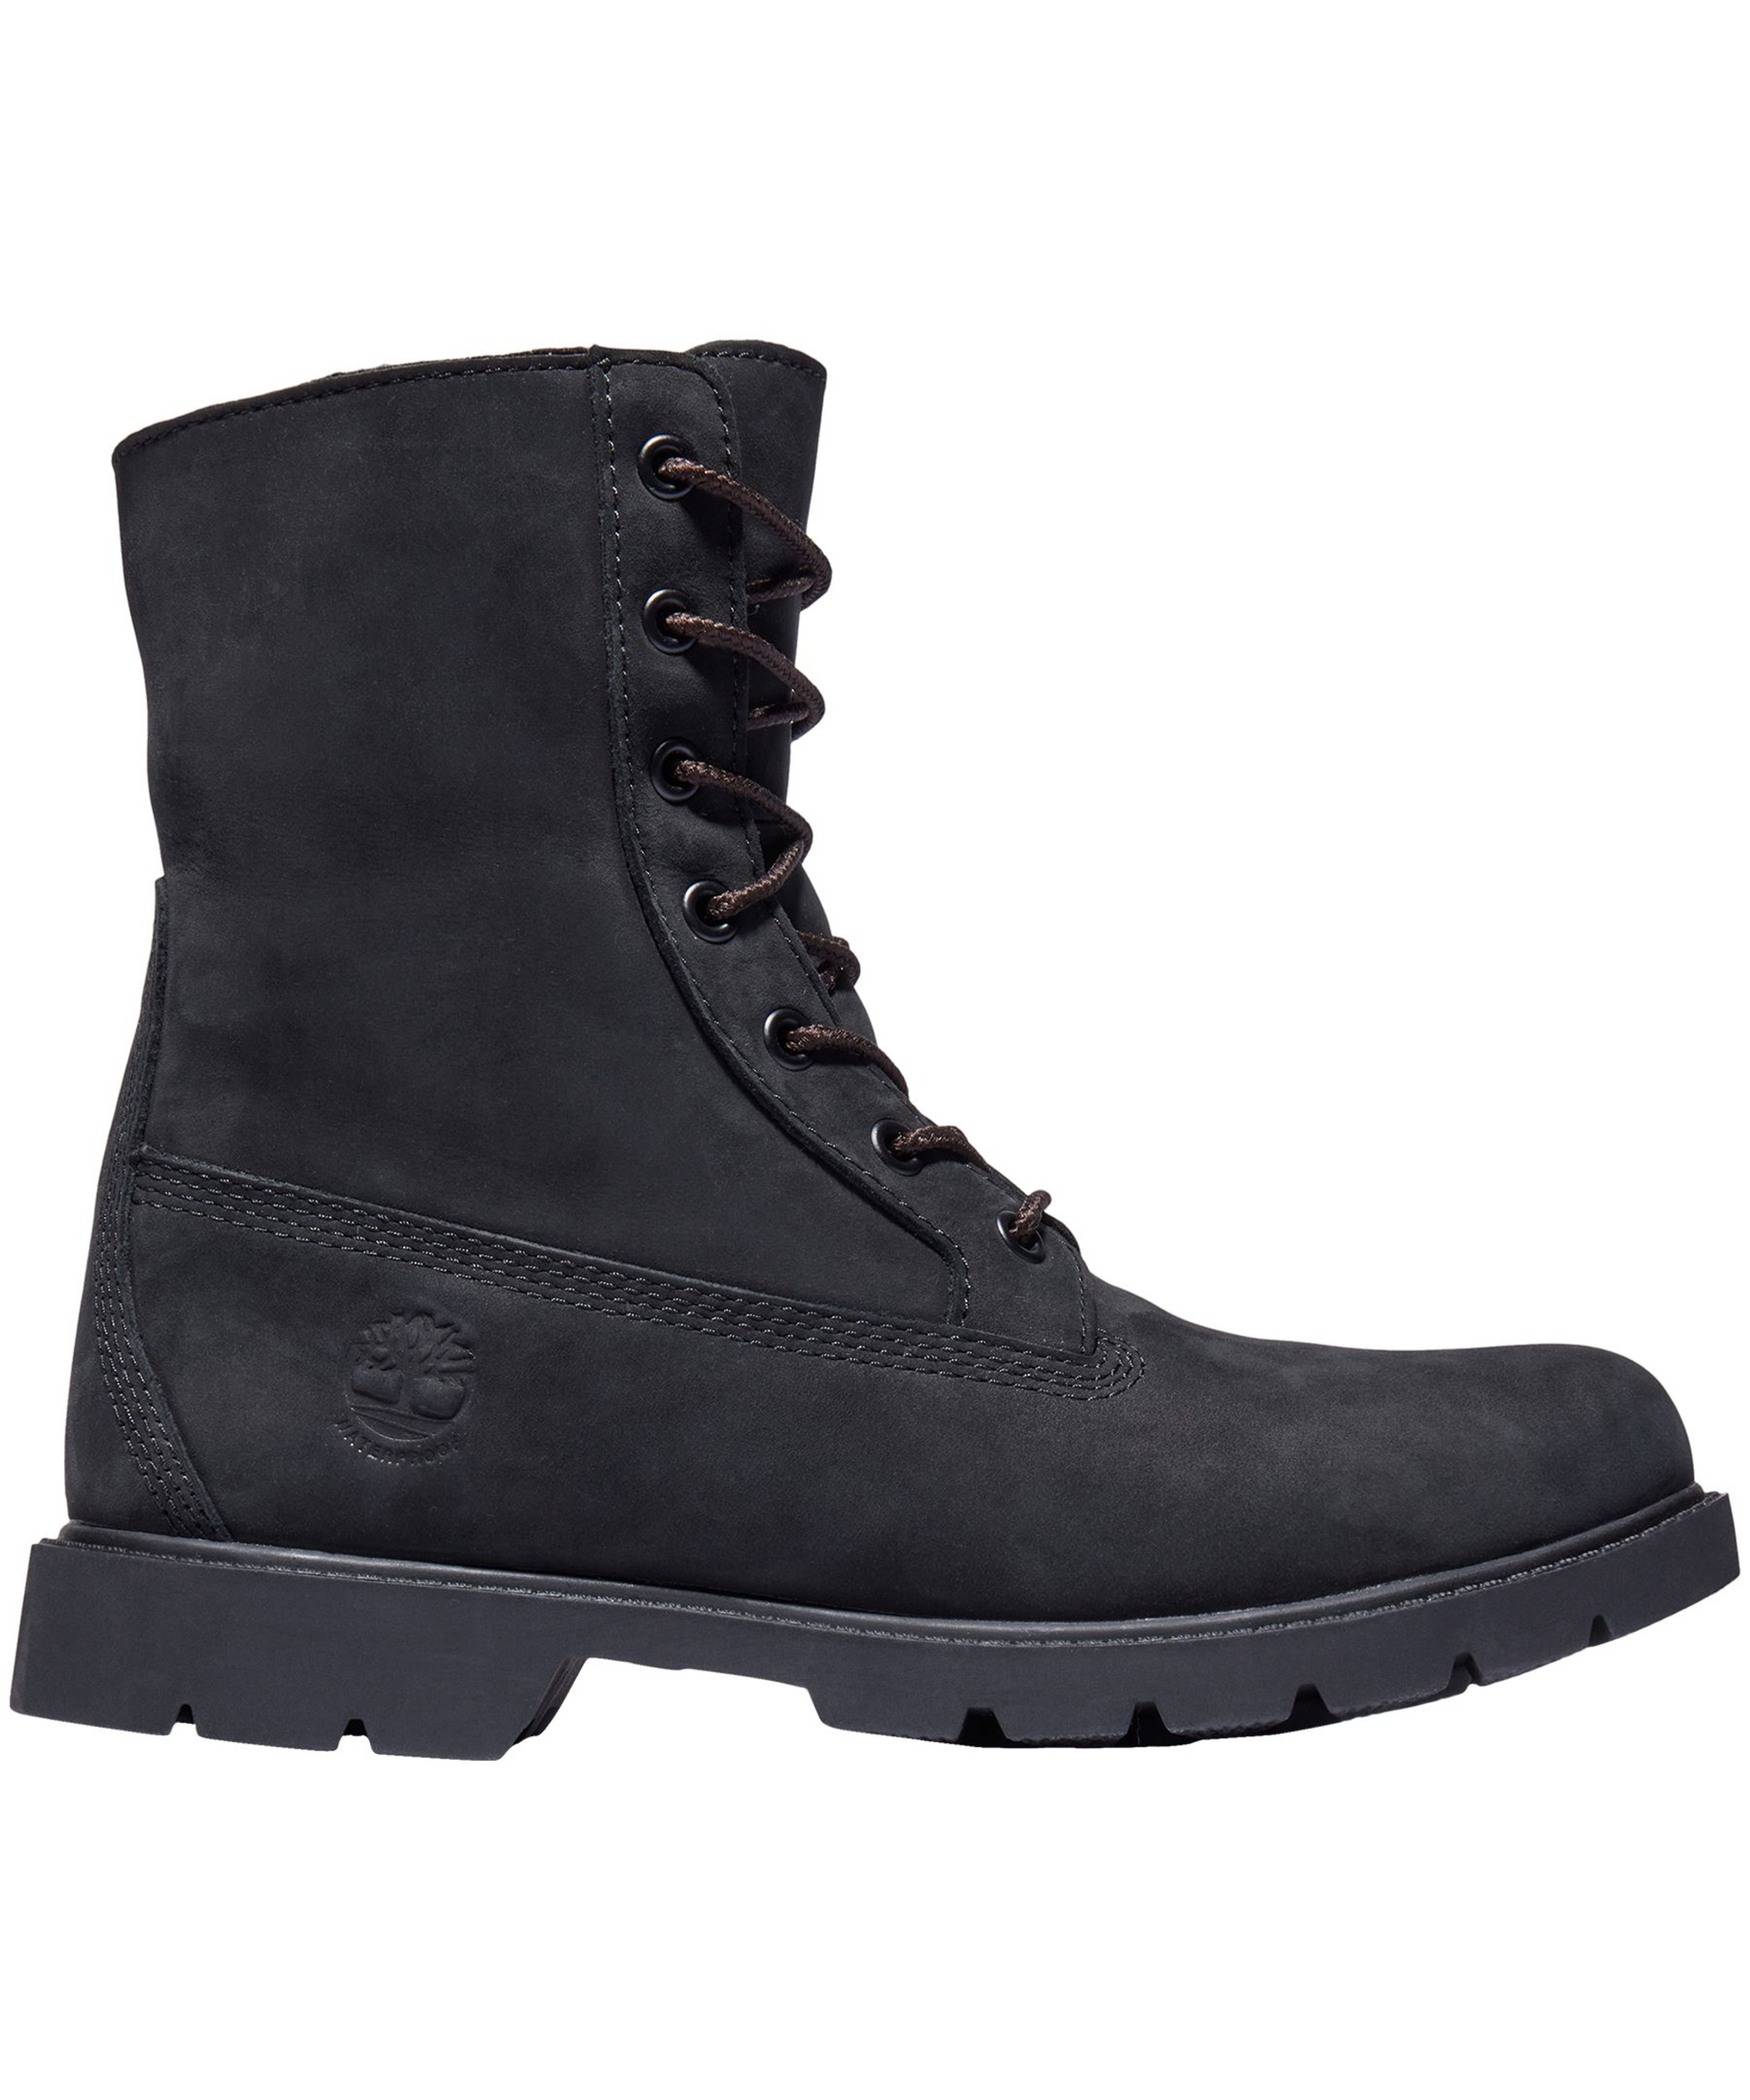 Timberland Women's Linden Woods Waterproof Leather Boots - Black | Marks